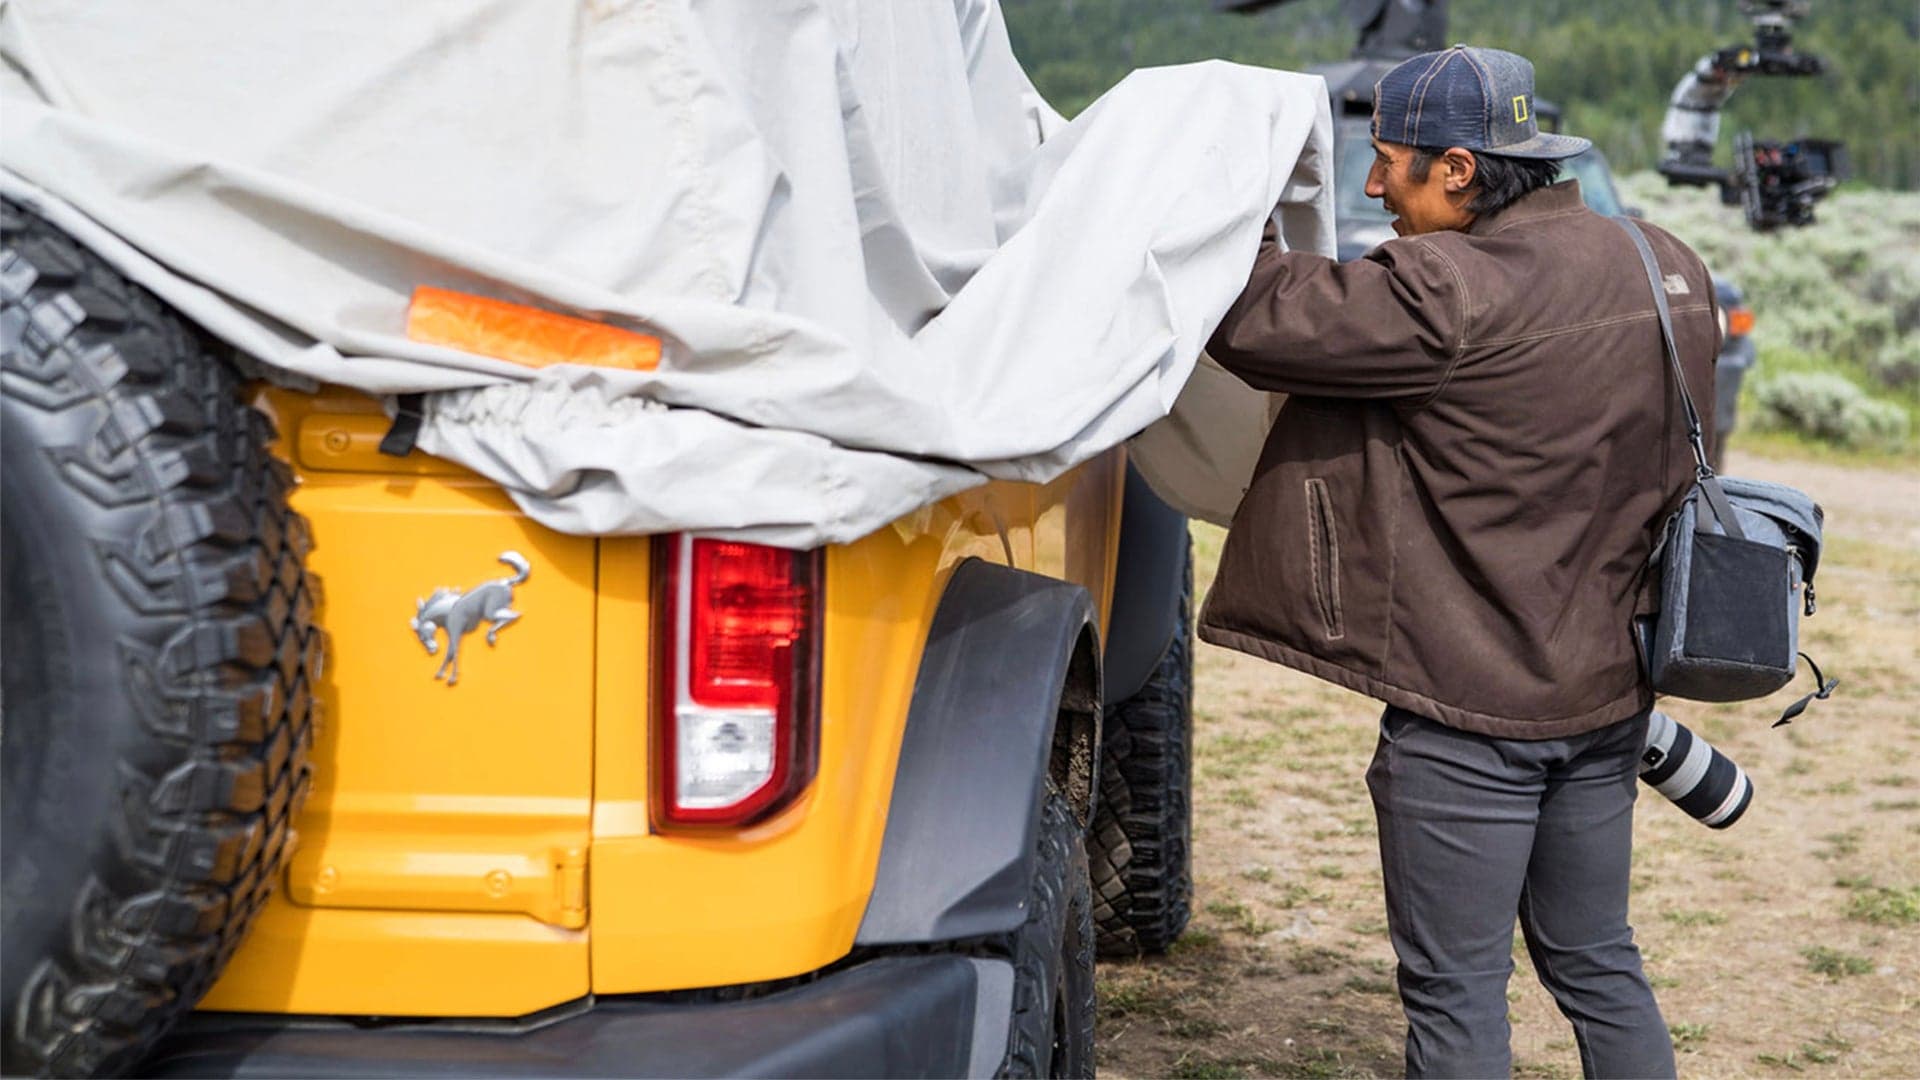 How Free Solo Filmmaker and Pro Climber Jimmy Chin Brought the 2021 Ford Bronco Into America’s Homes